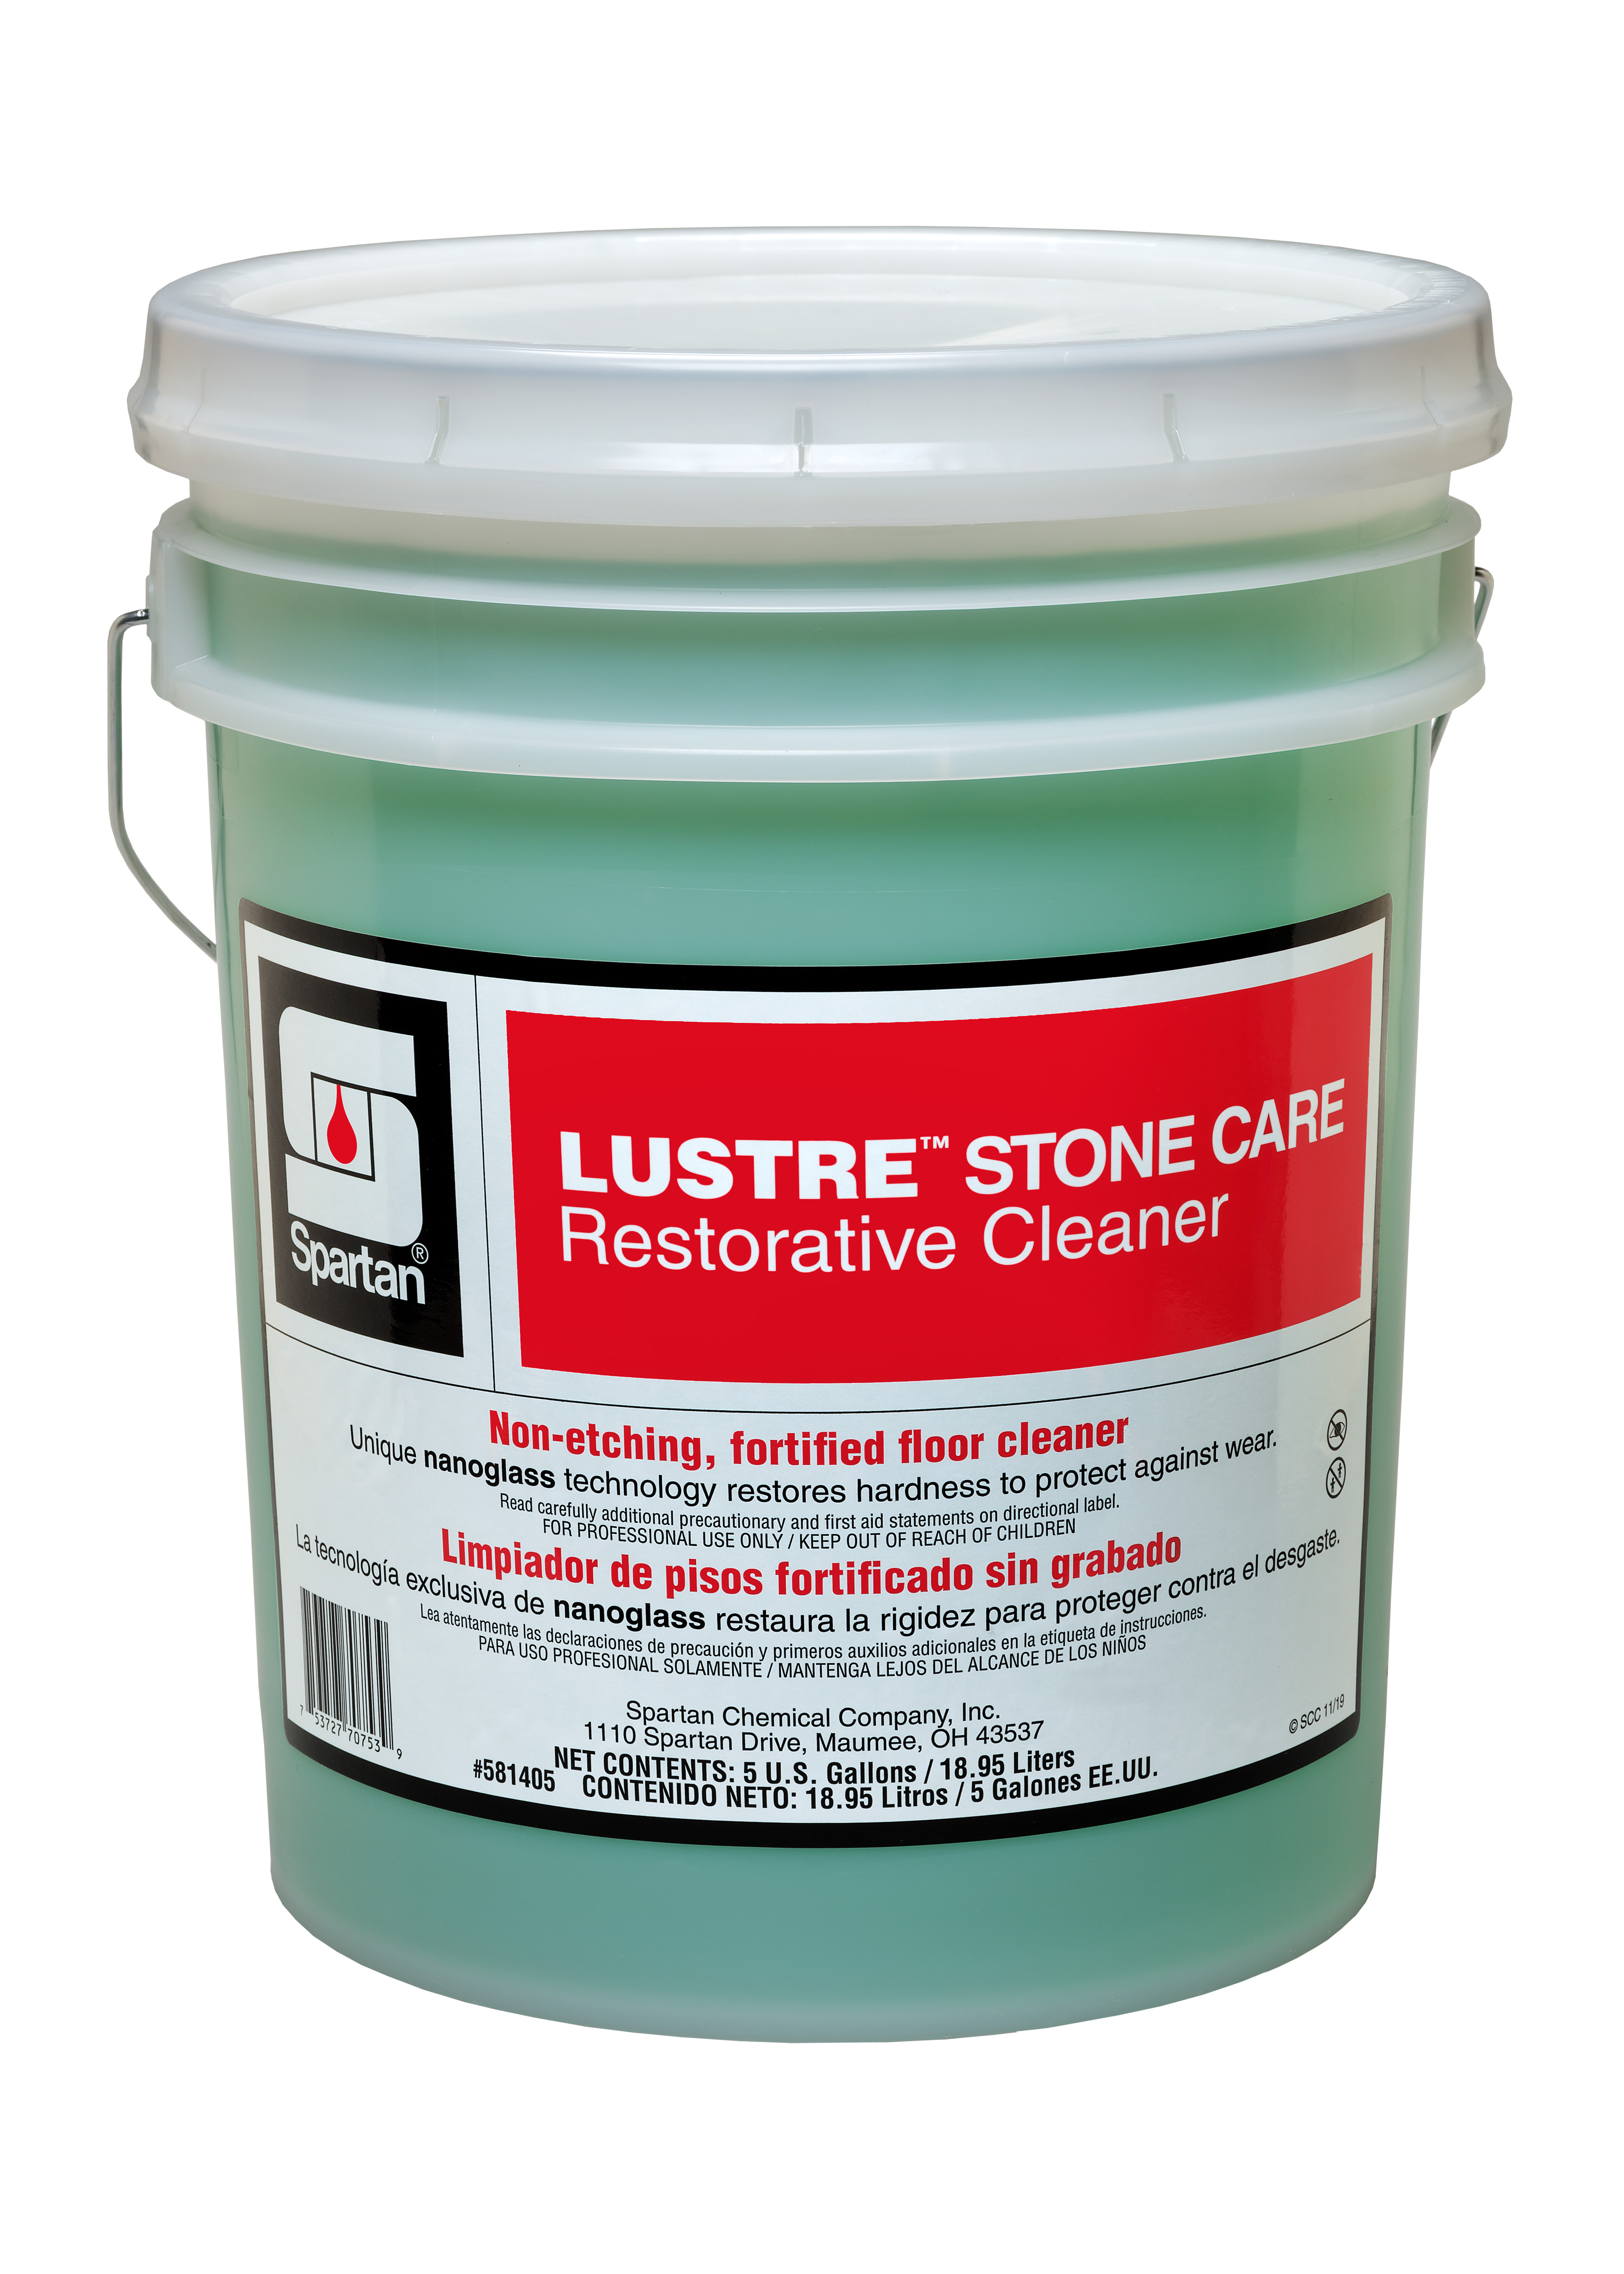 Spartan Chemical Company Lustre Stone Care Restorative Cleaner, 5 GAL PAIL